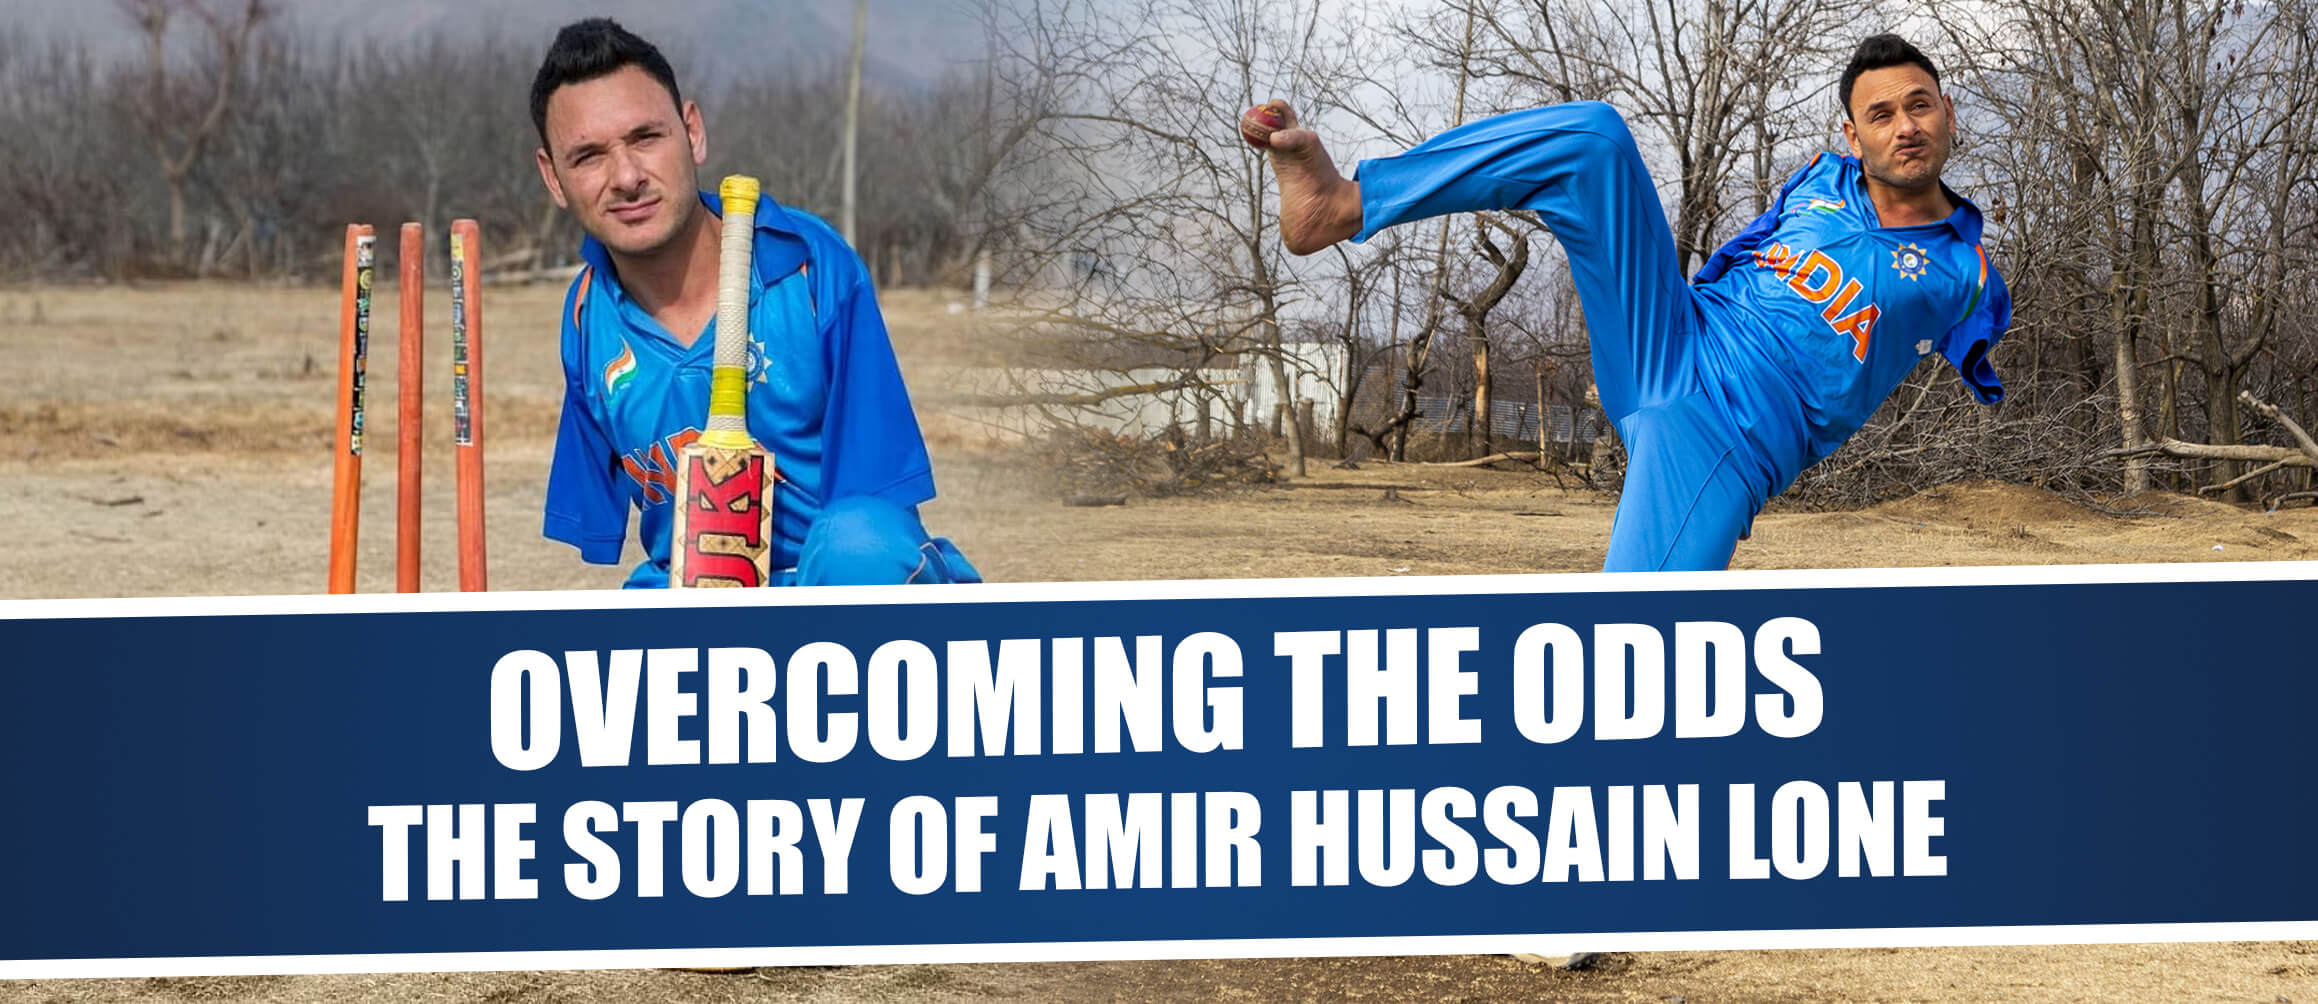 Overcoming the Odds: The Story of Amir Hussain Lone